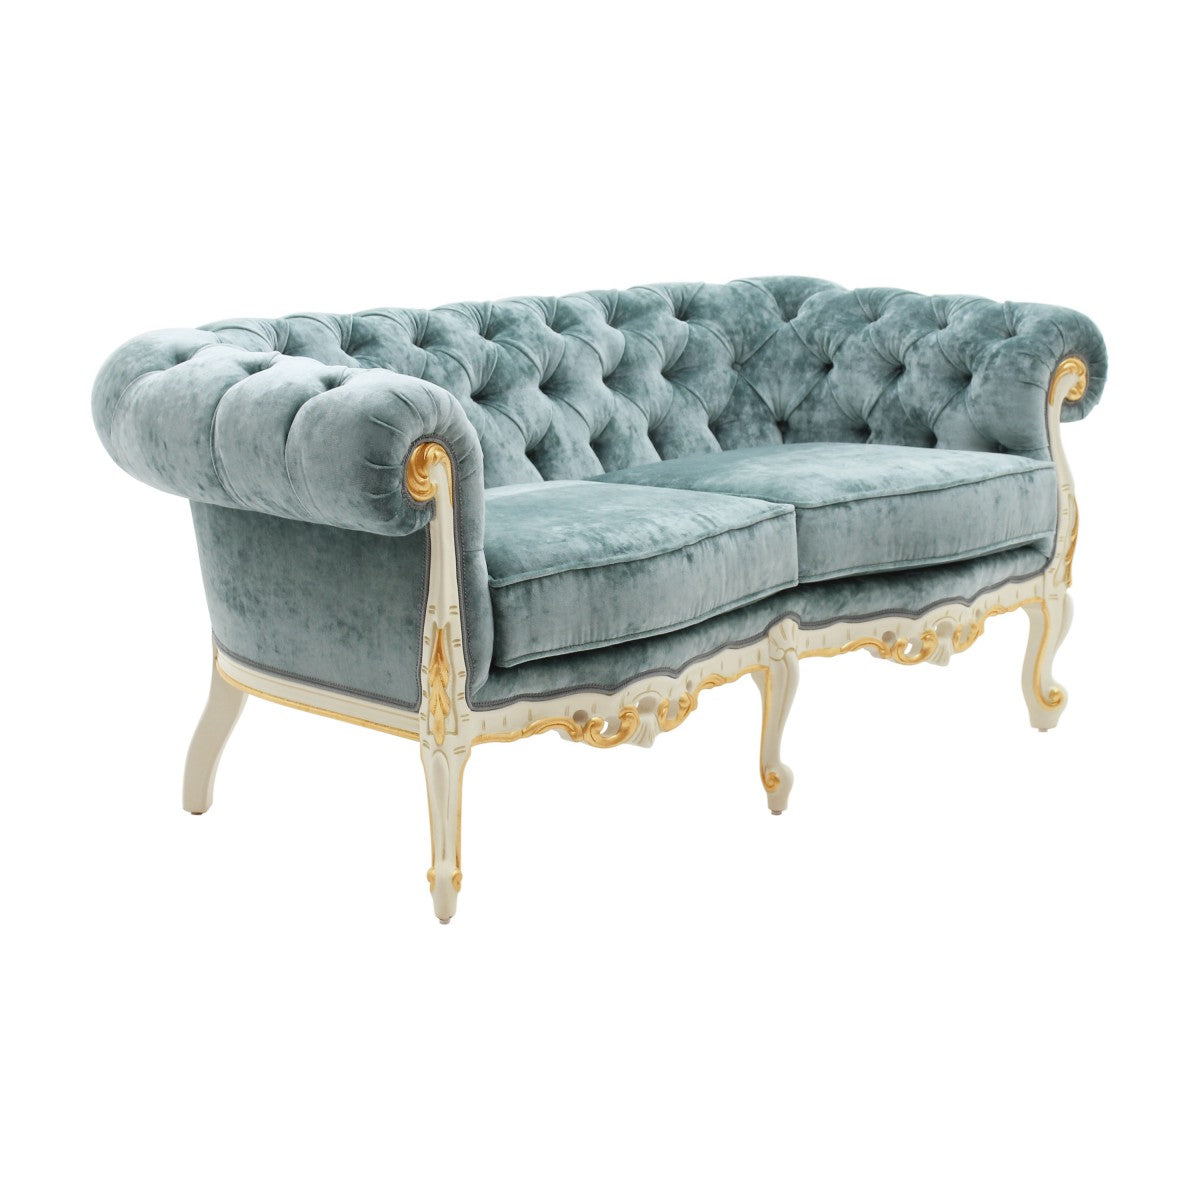 Febo Bespoke Upholstered Baroque Style Two Seater Sofa MS9100D Custom Made To Order